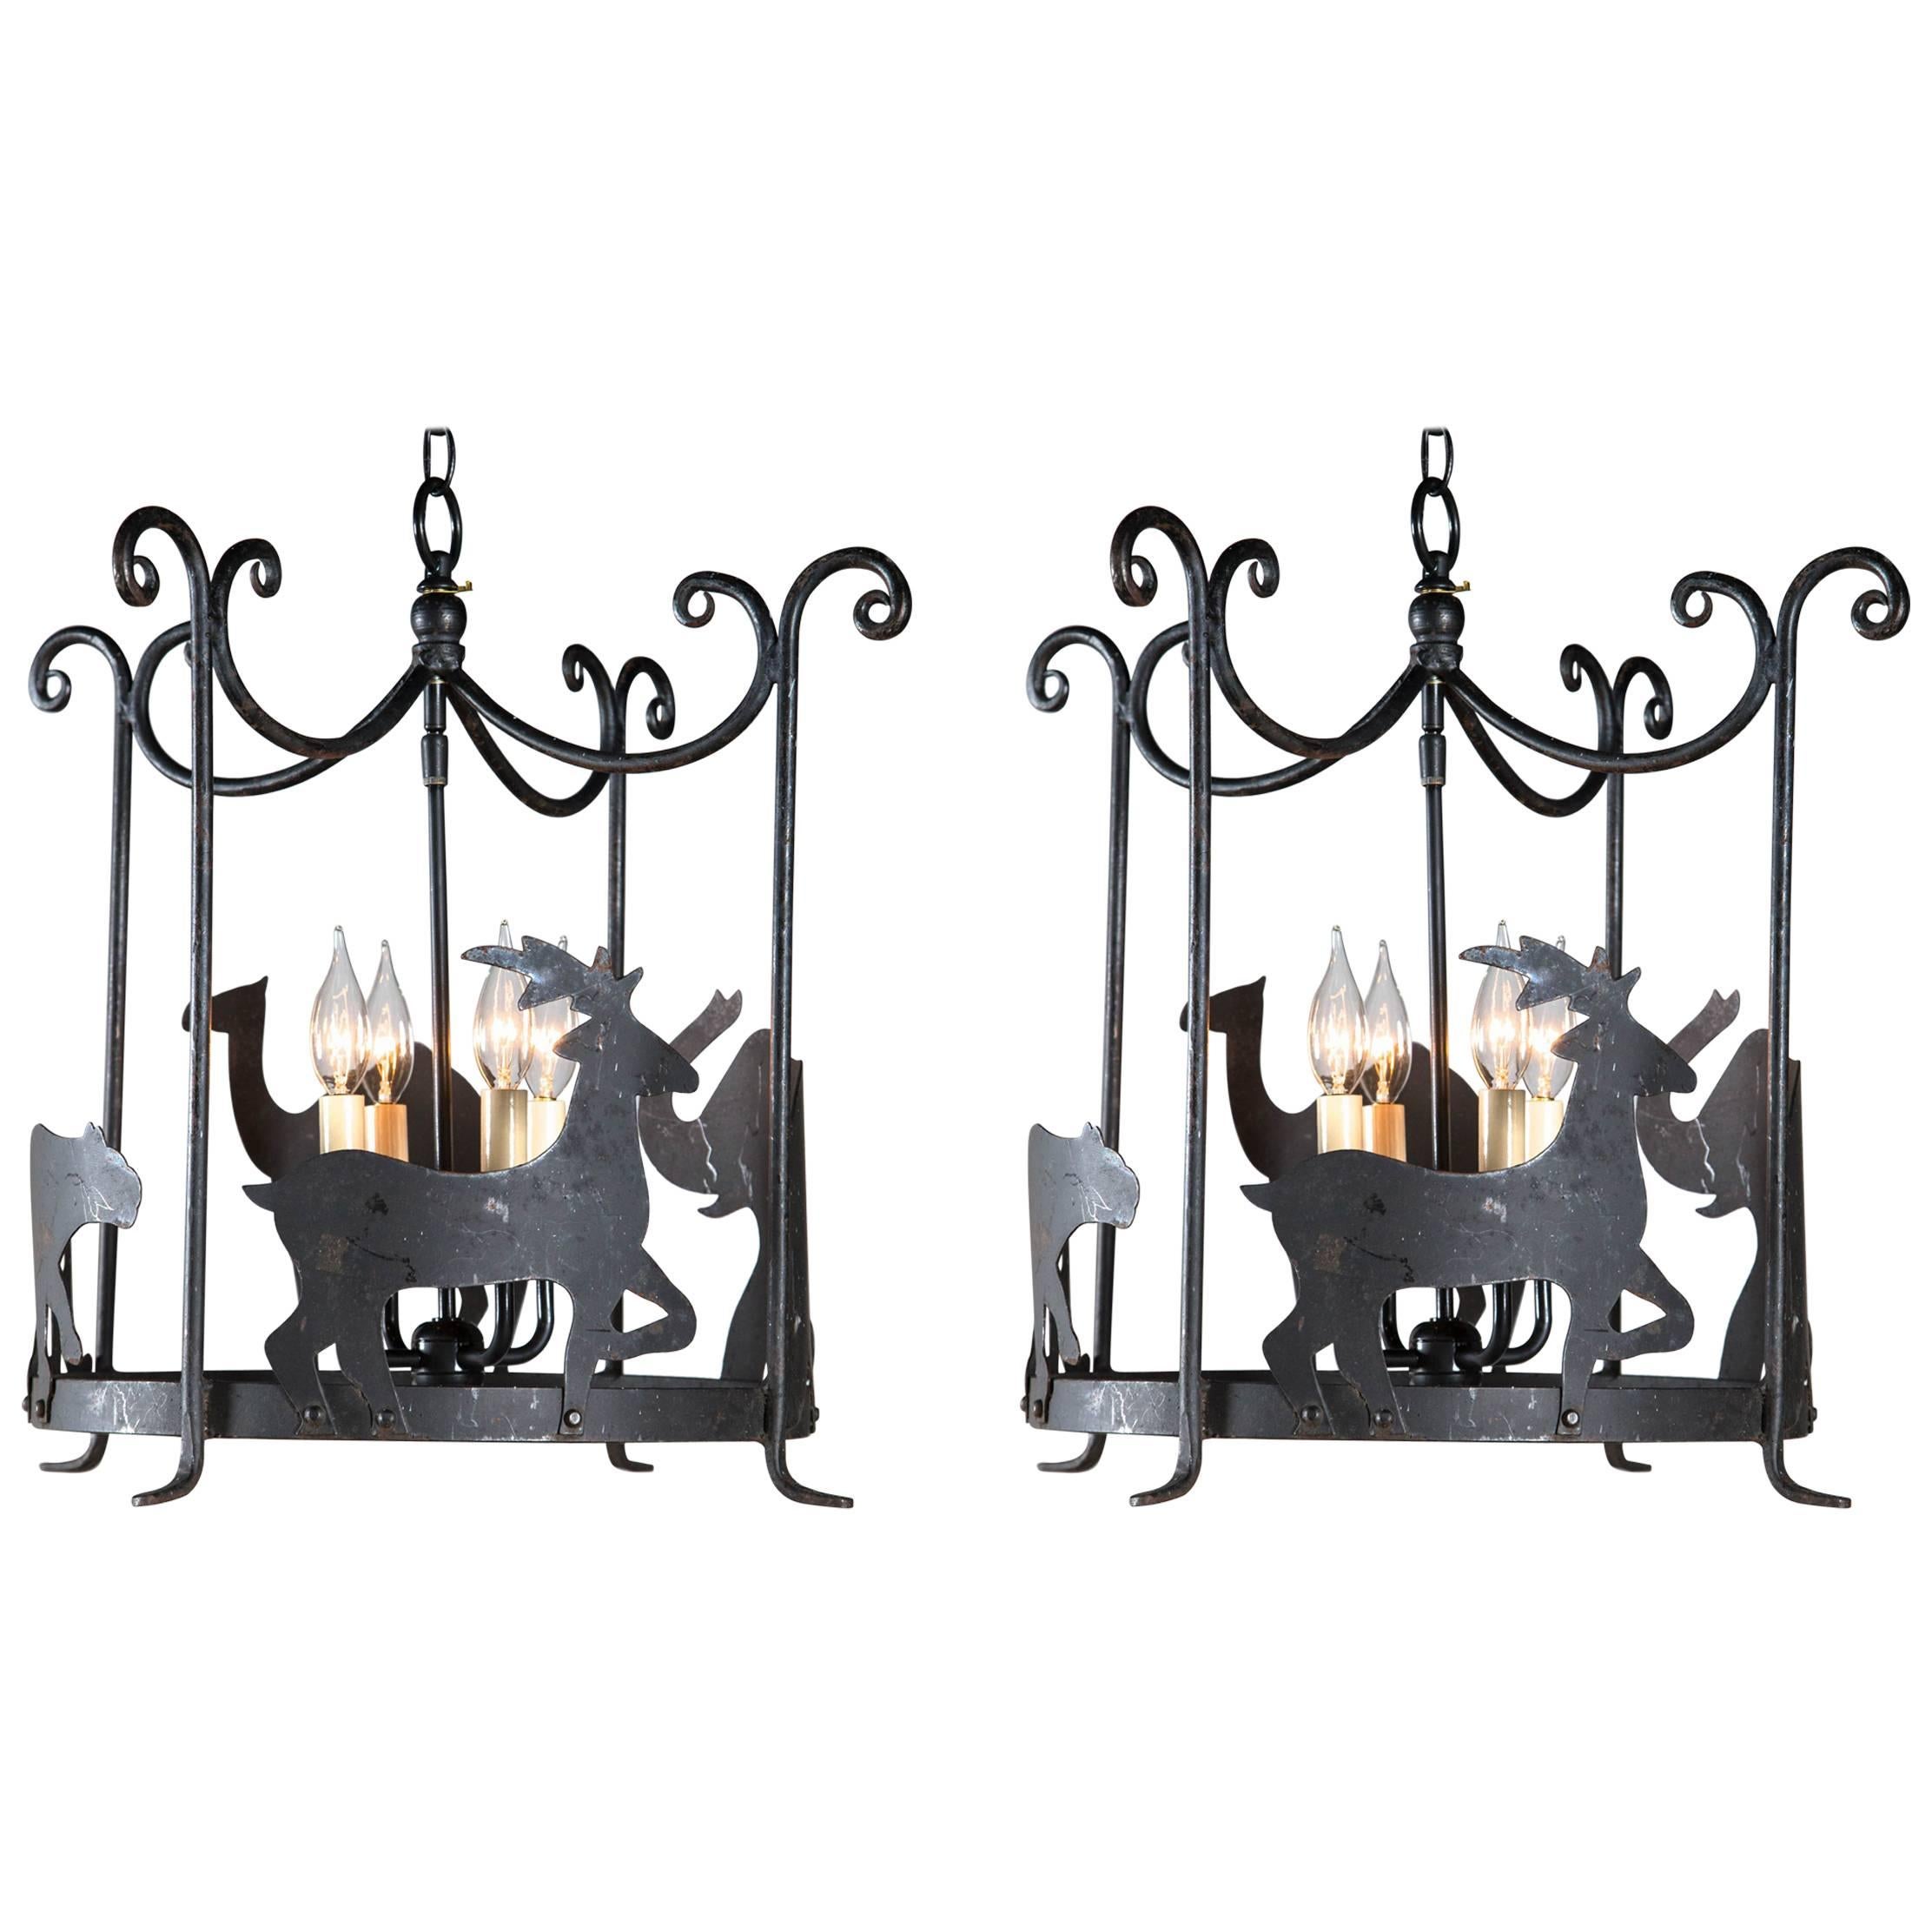 Pair of Whimsical Iron Chandeliers